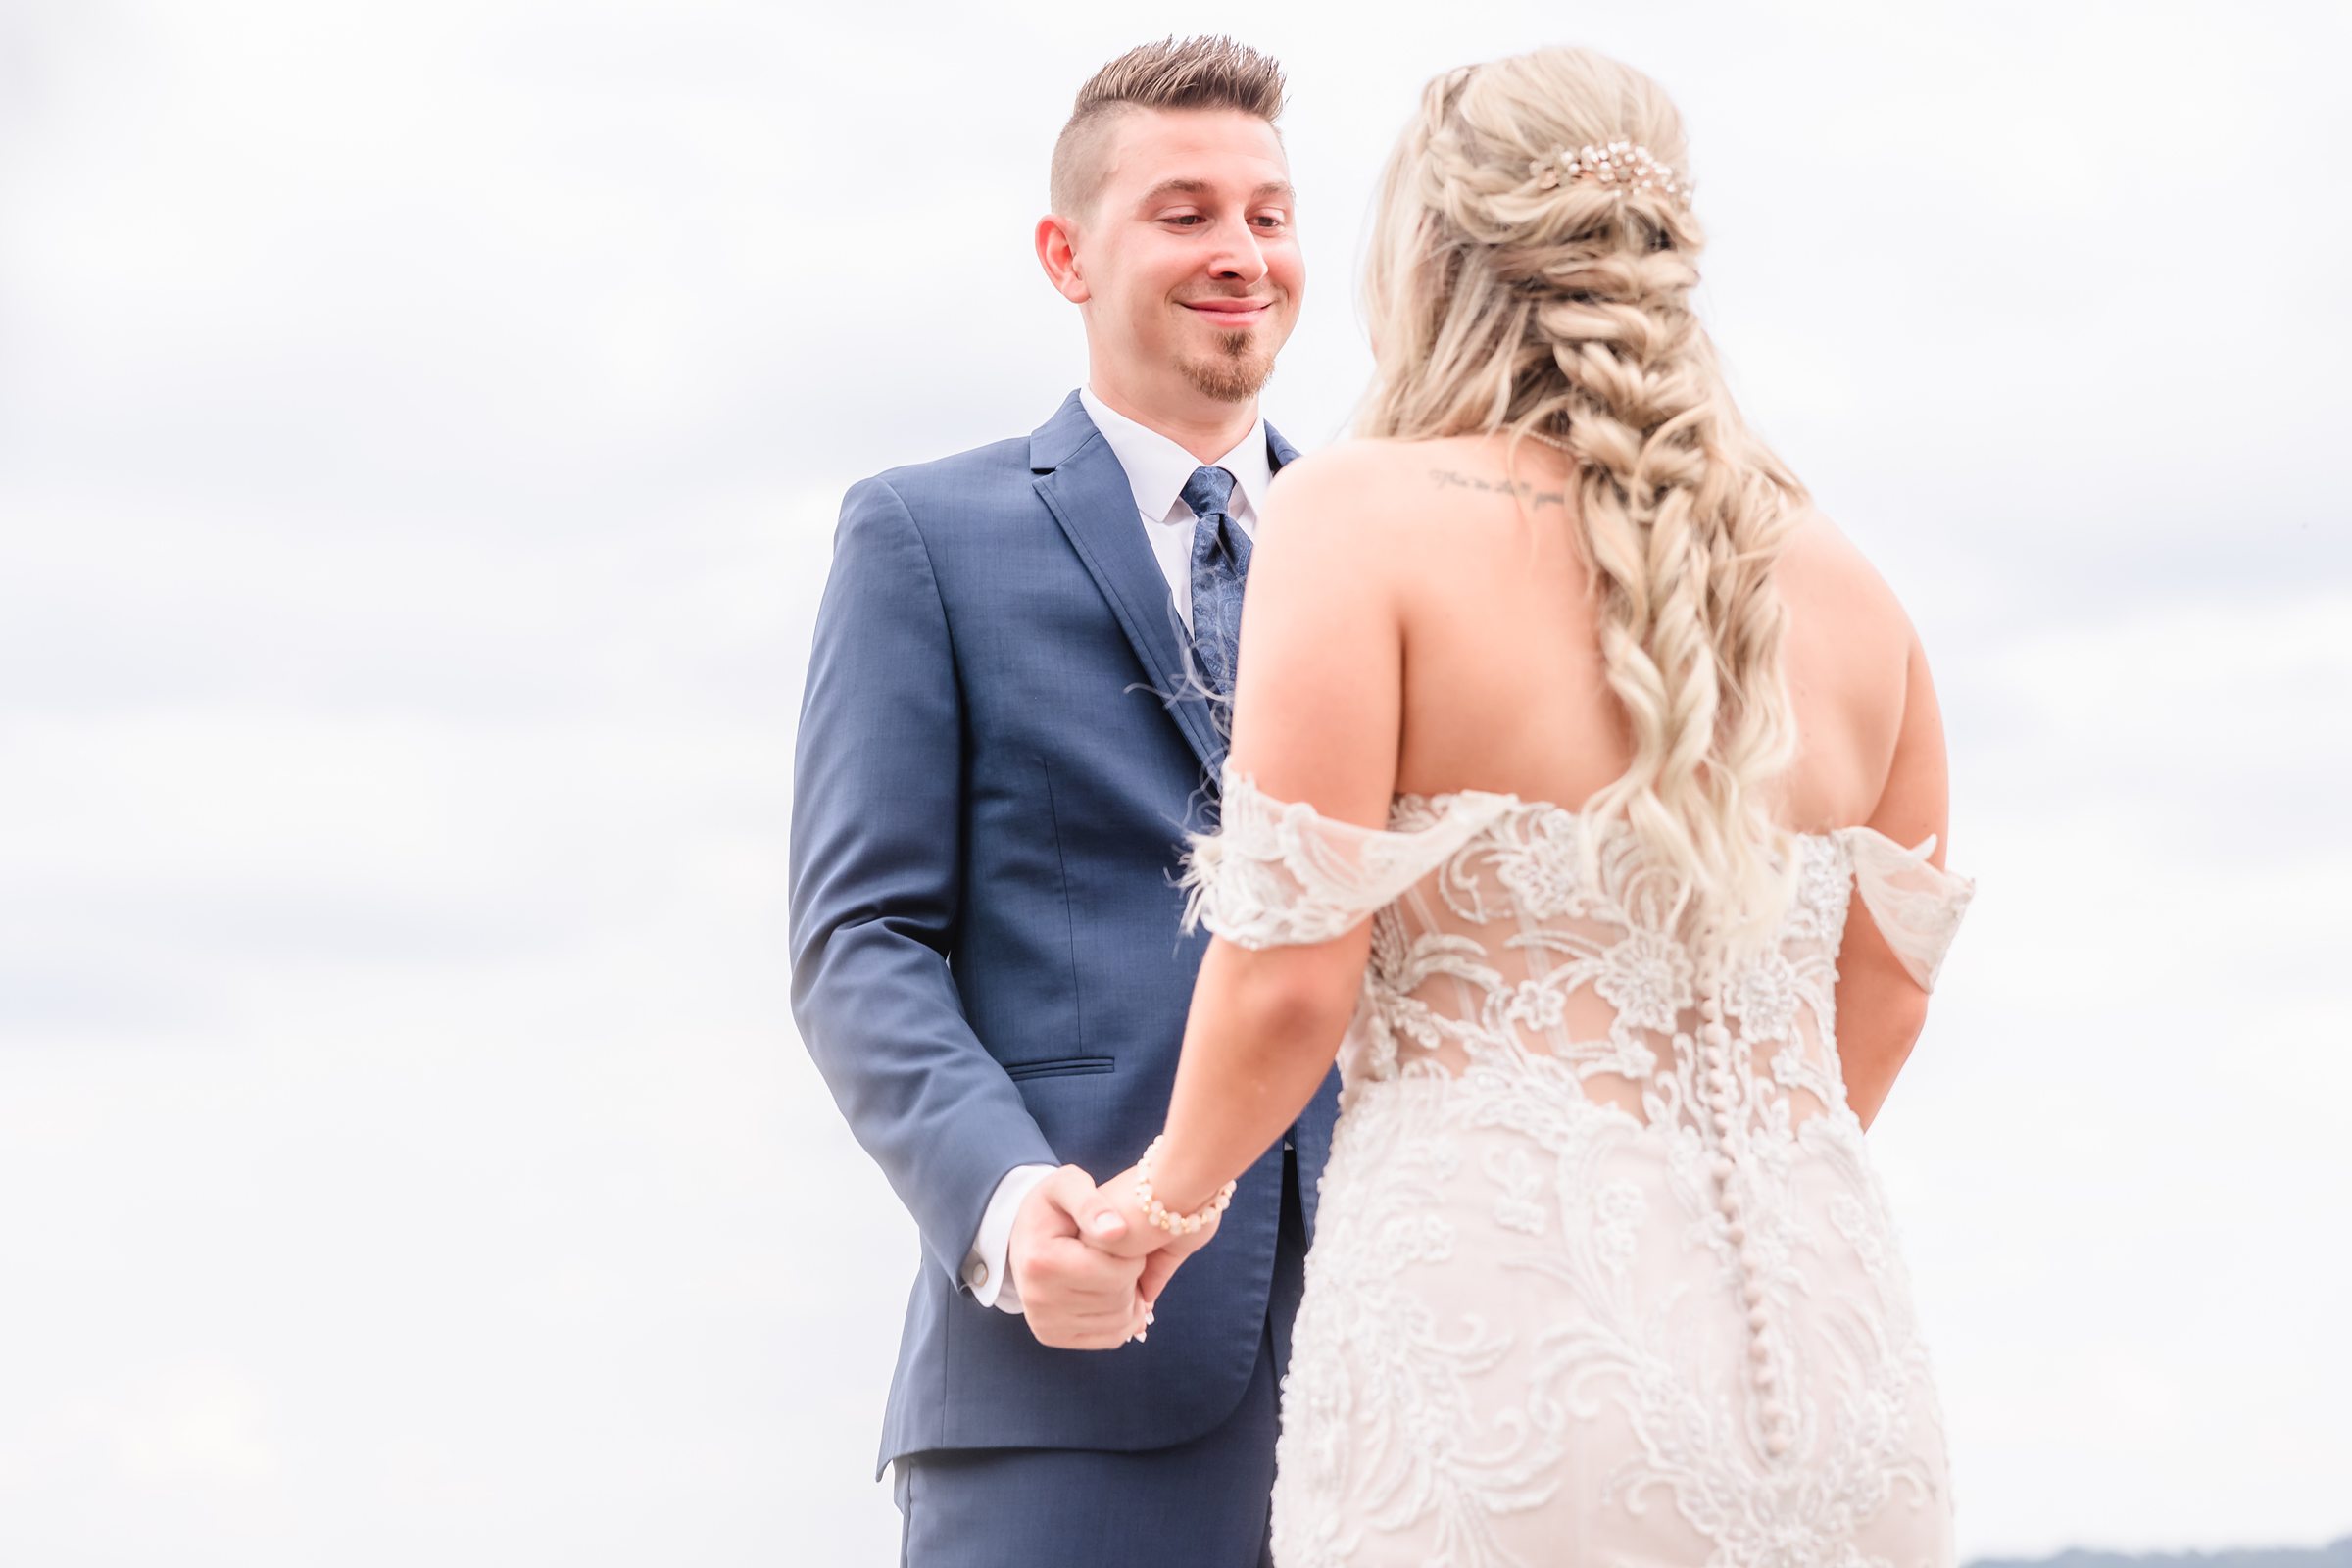 The groom sees his bride for the first time on the Peoria Riverfront in Illinois.